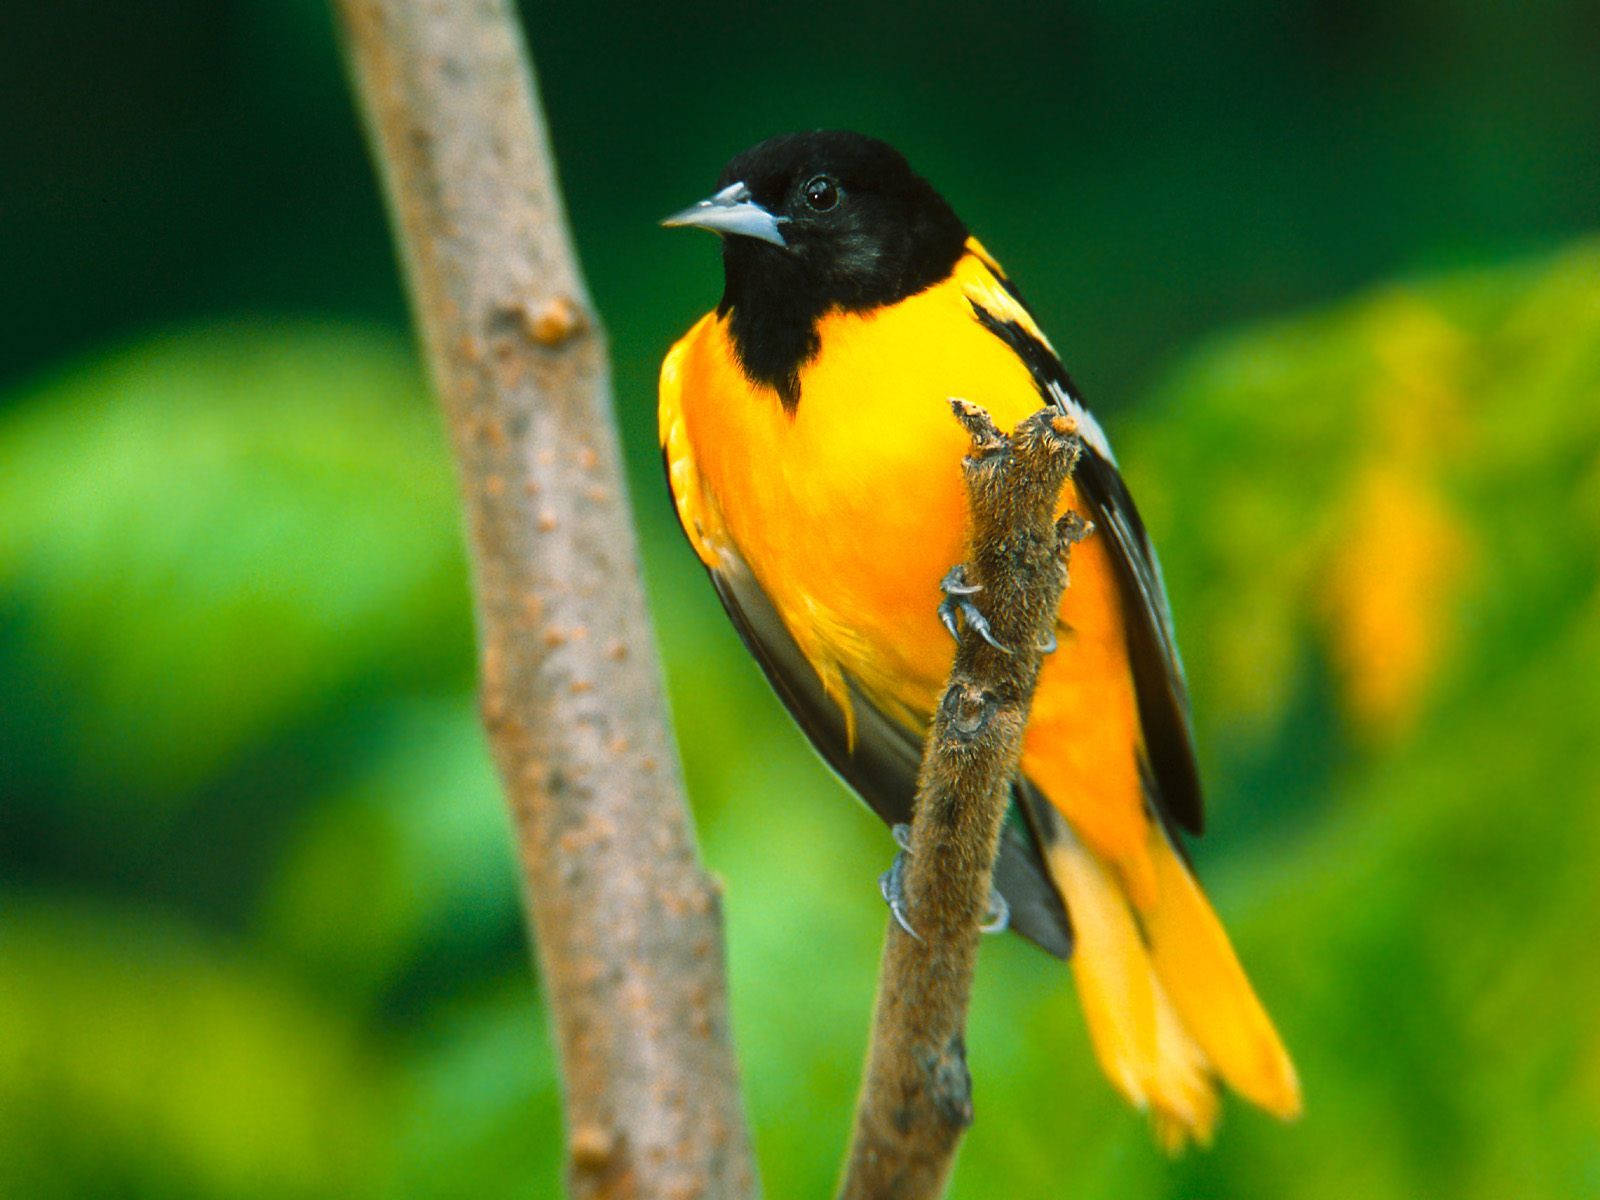 Vibrant Yellow Bird Perched in Nature Wallpaper